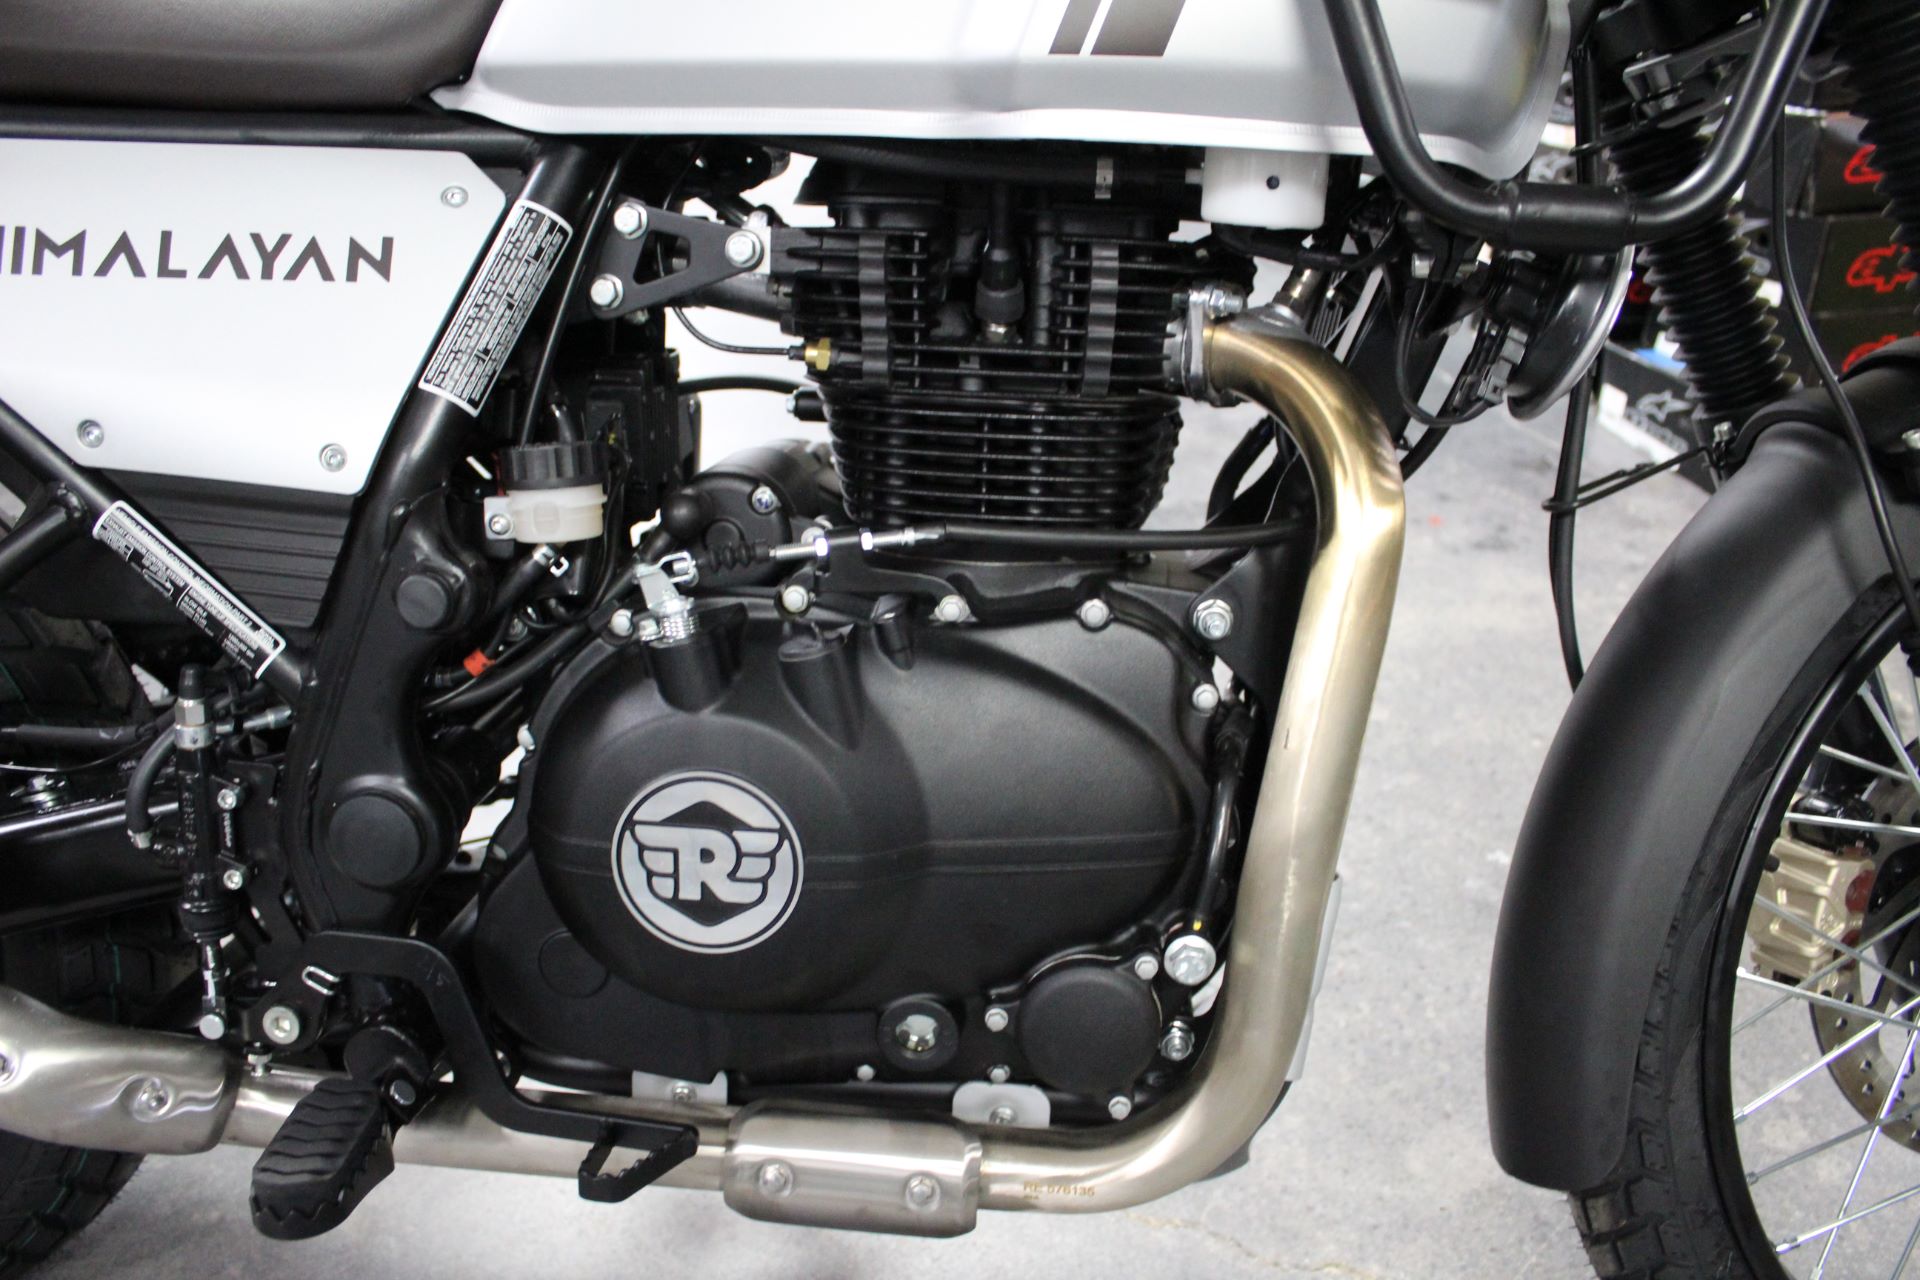 2022 Royal Enfield Himalayan in West Allis, Wisconsin - Photo 6